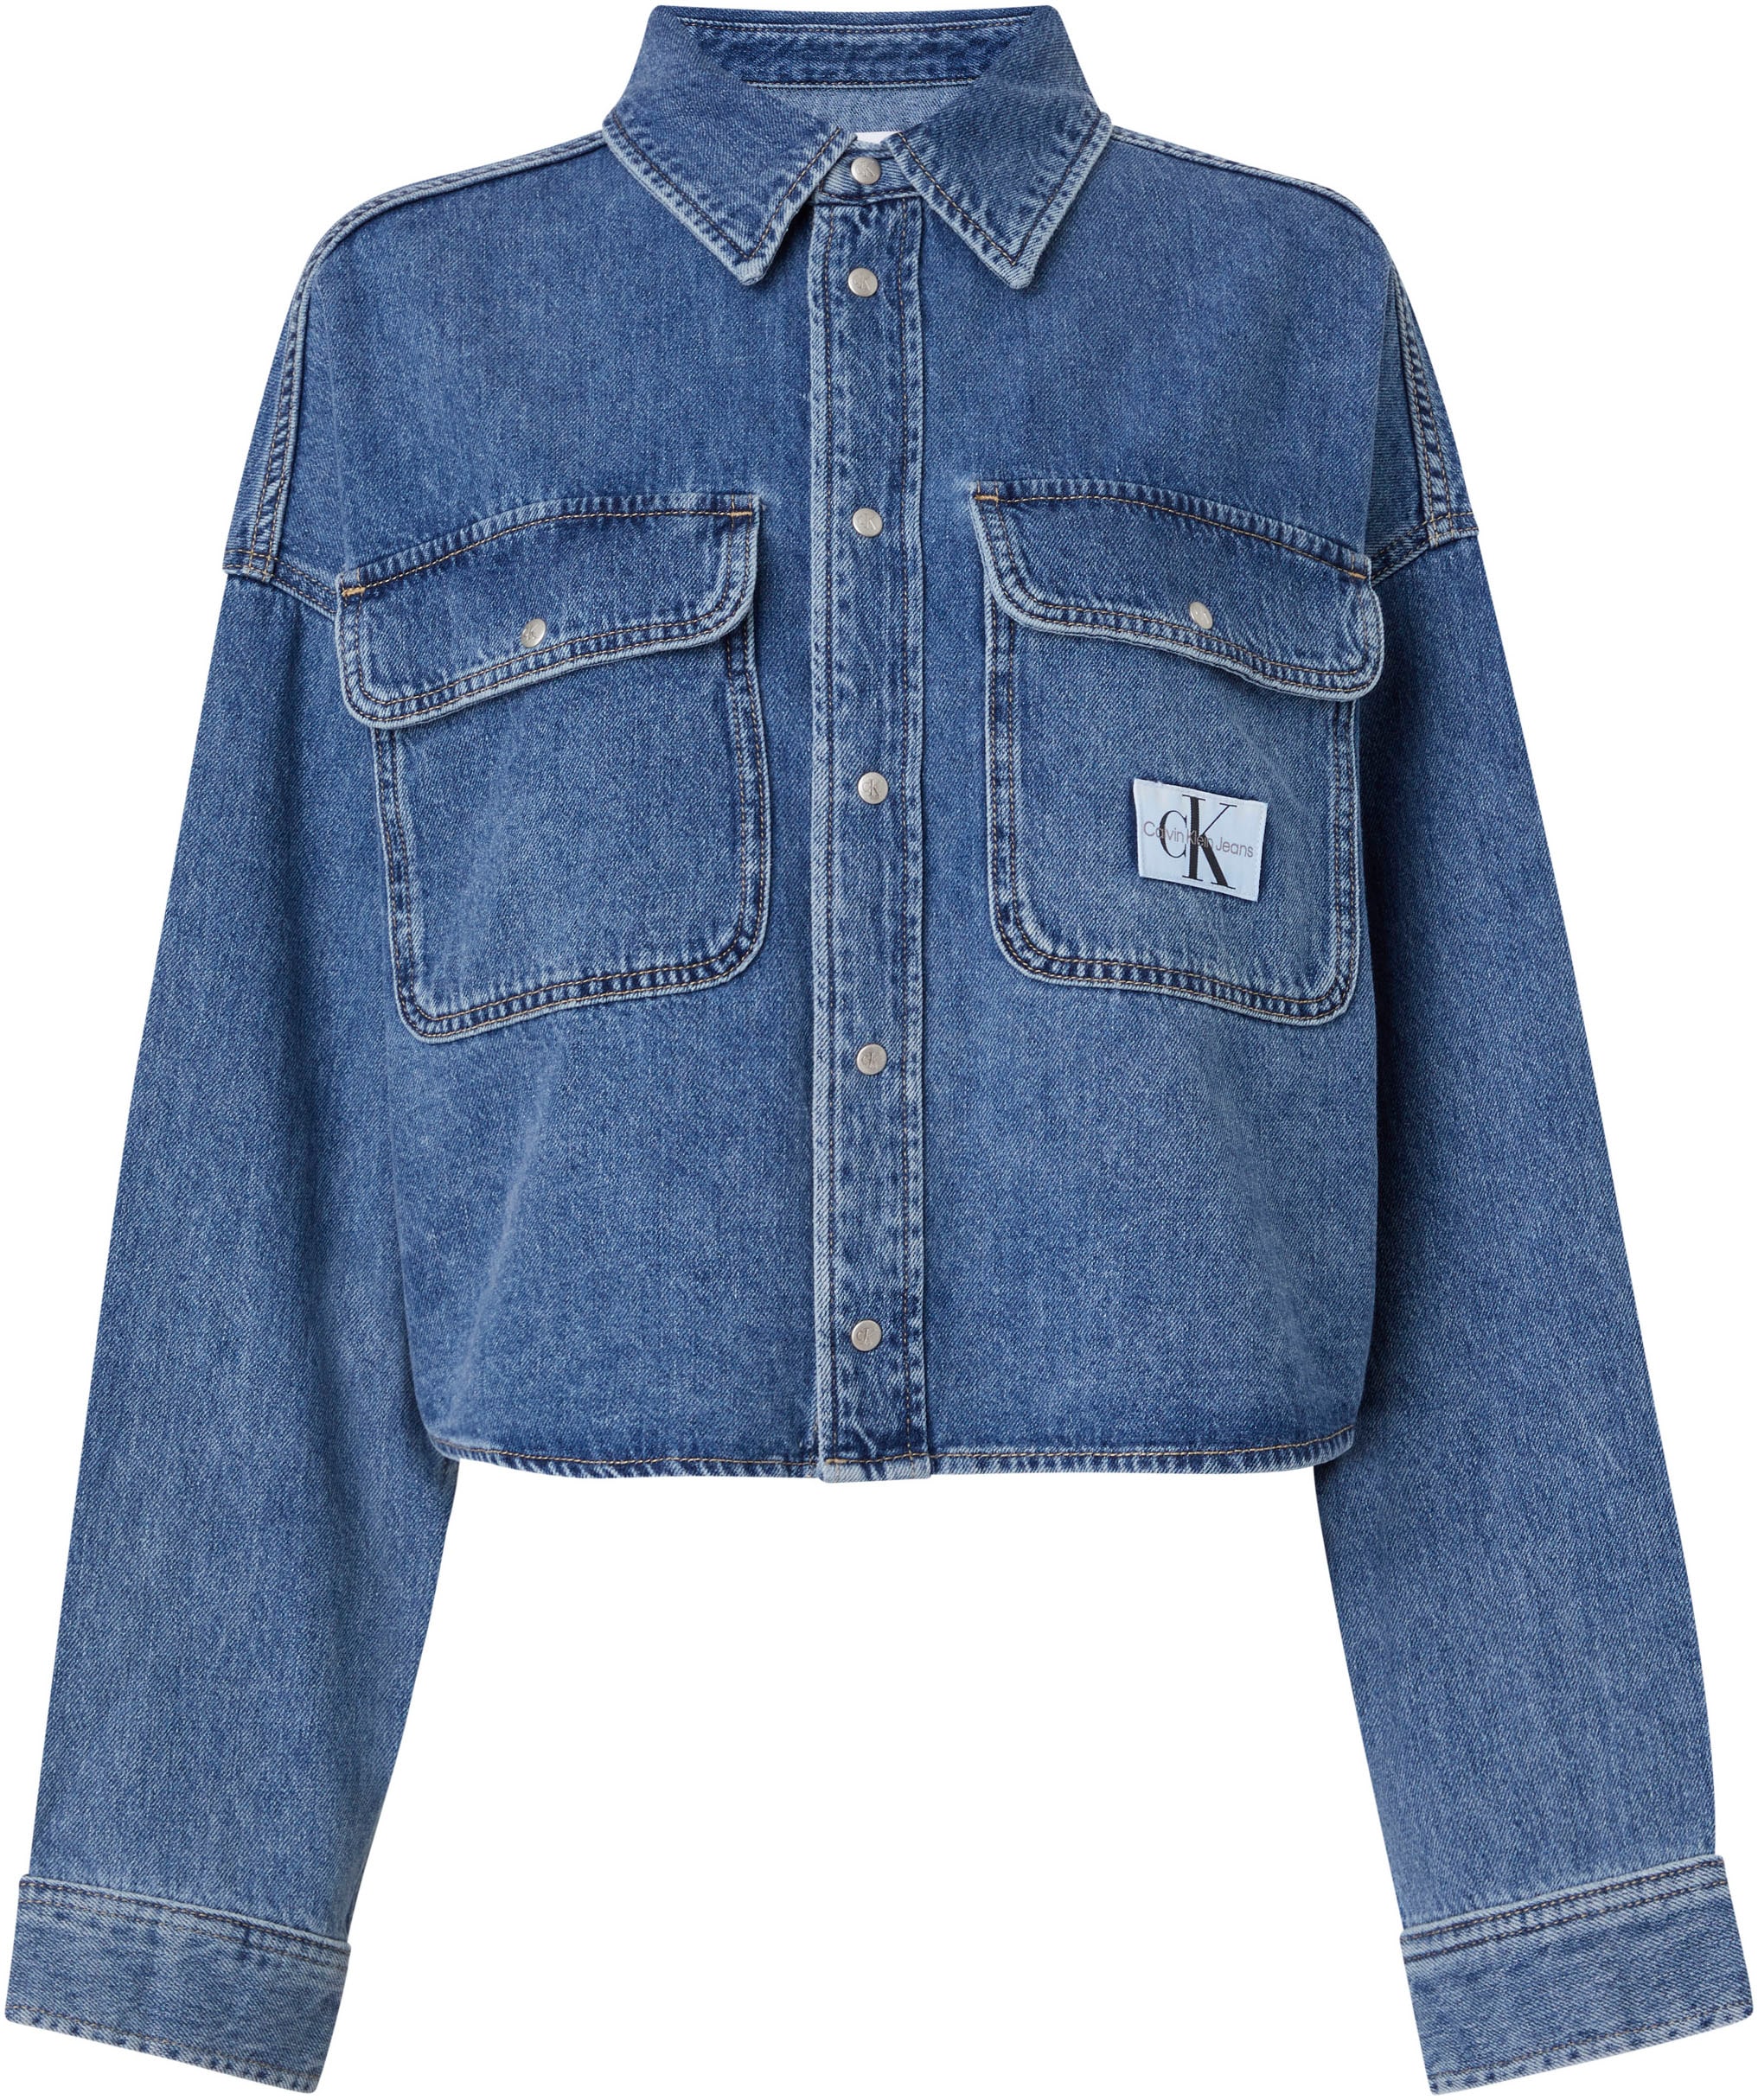 Calvin Klein Jeans Jeansbluse ROUNDED bei ♕ »OVERSIZED SHIRT« CROP HEM